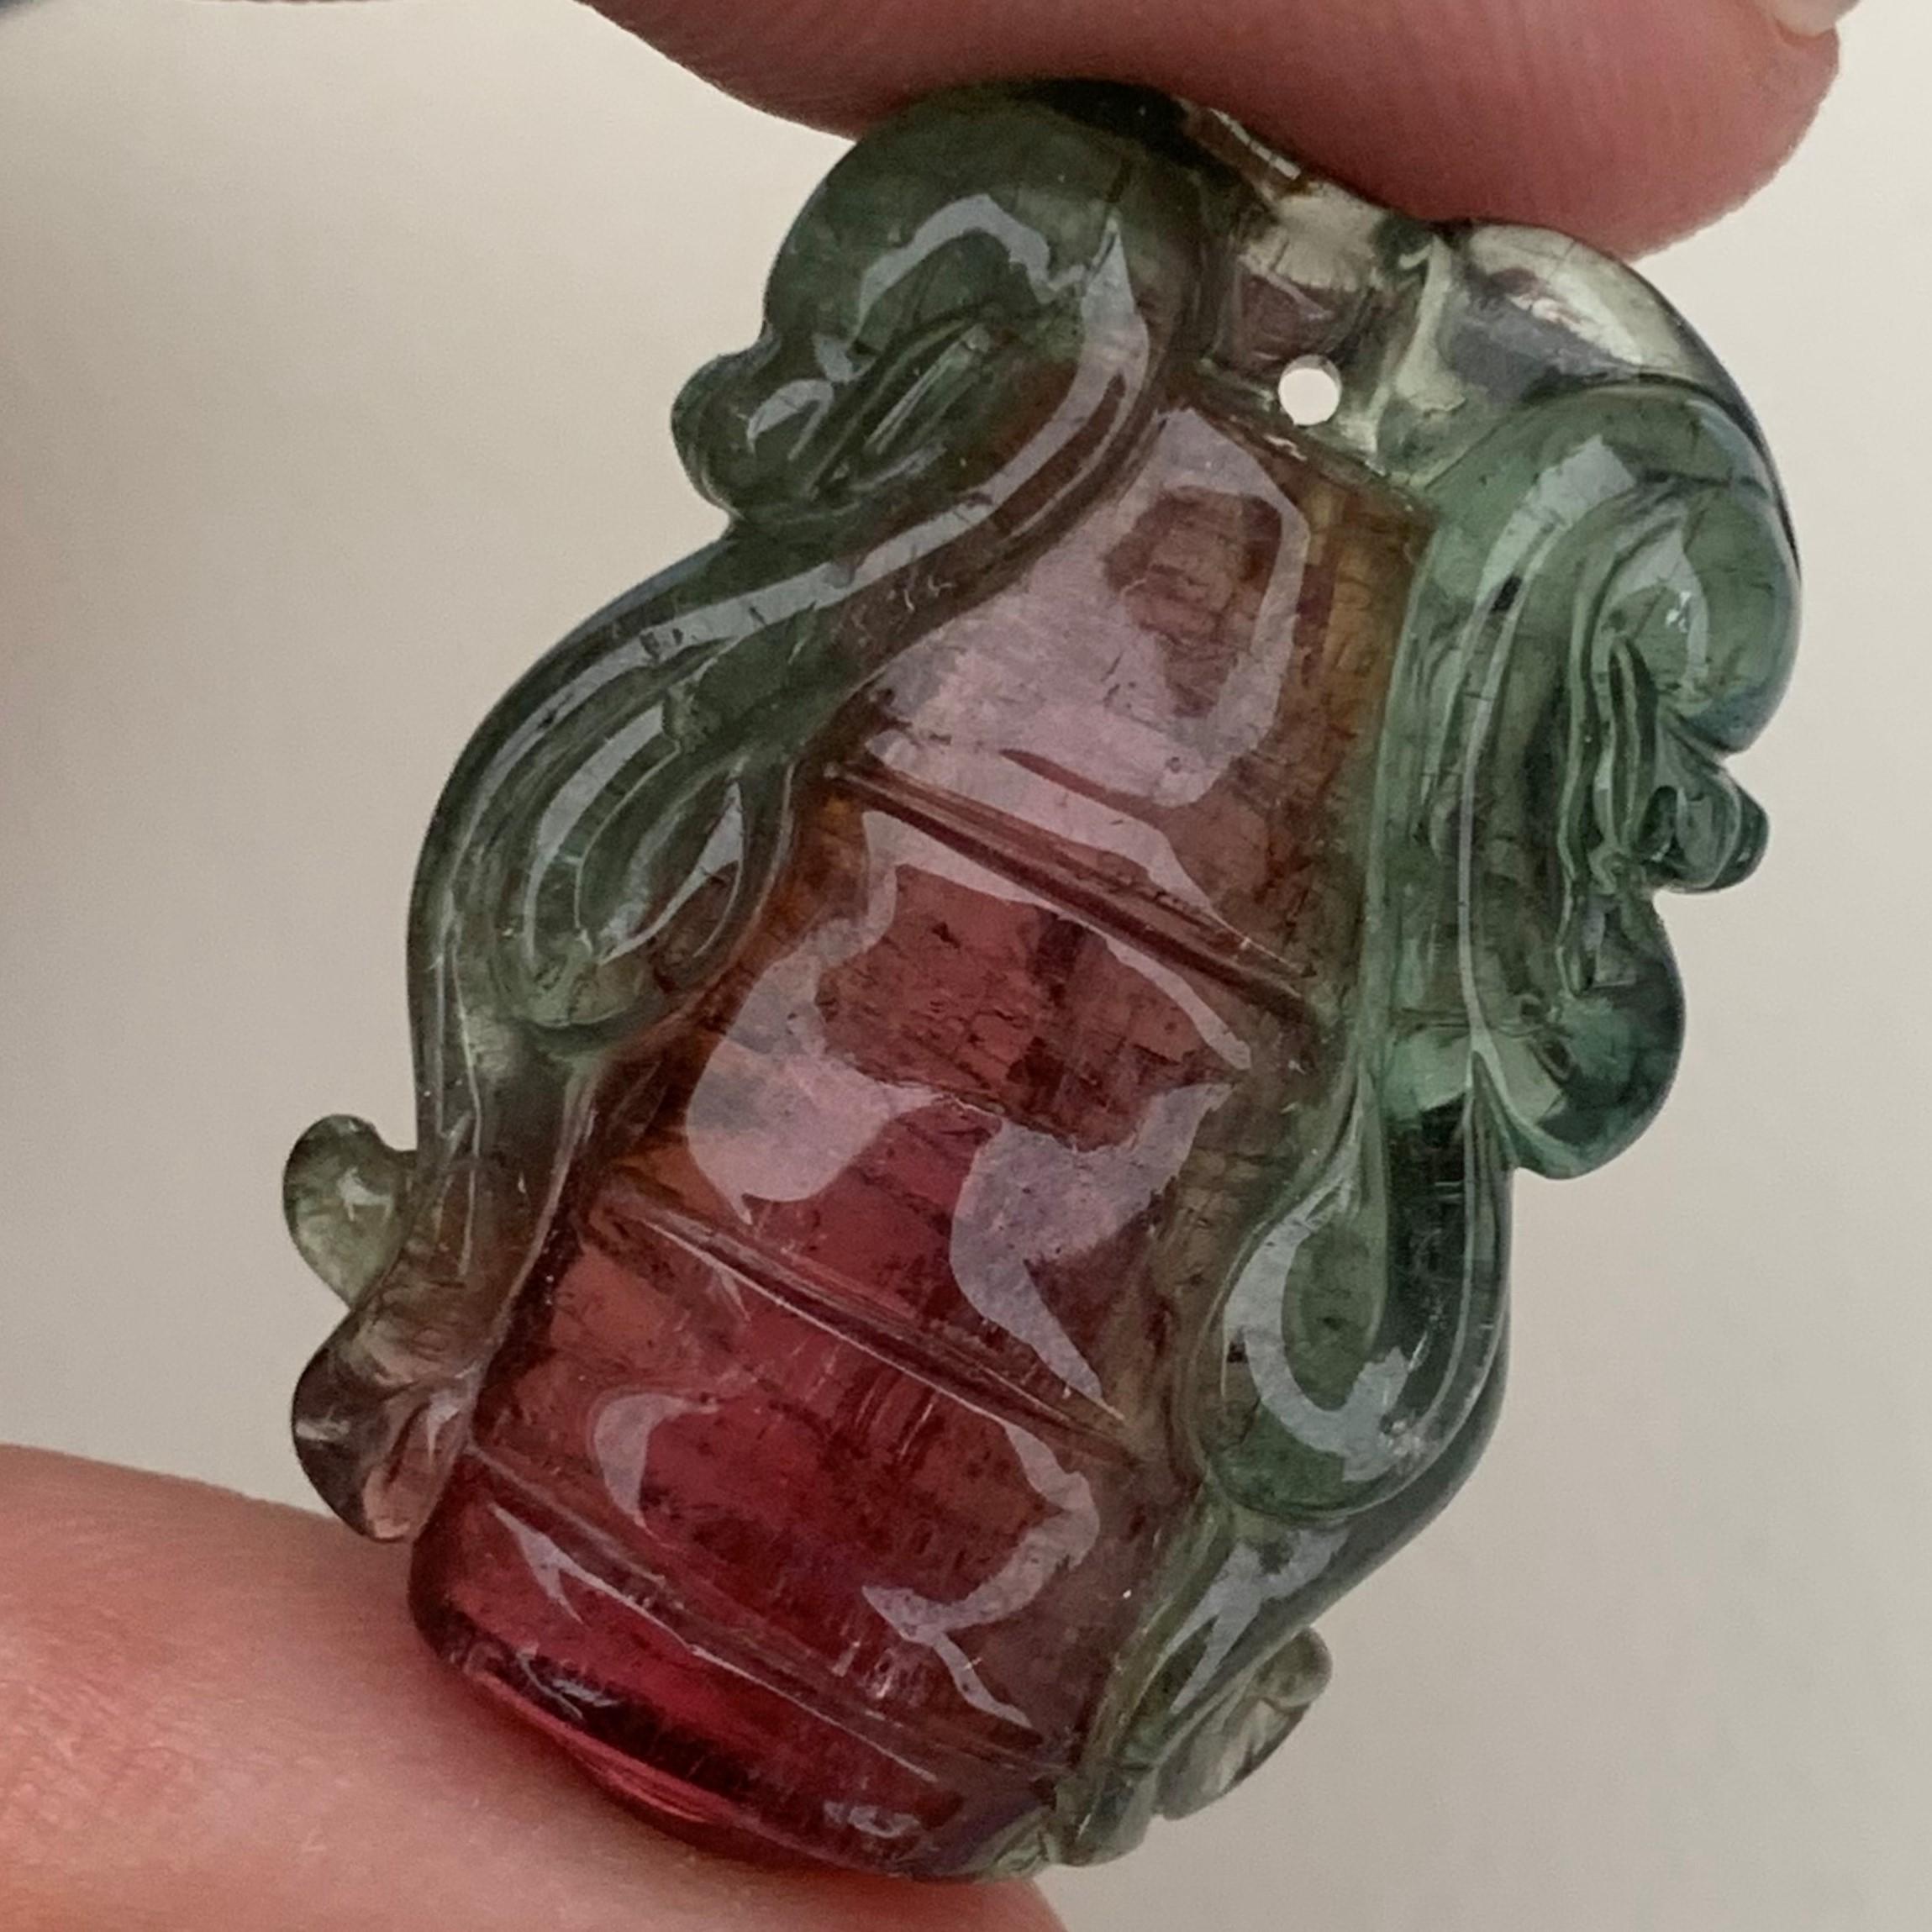 Bicolor Tourmaline Carved
Weight: 47.70 Carats
Dimension: 41x20.5x8.5 Mm
Origin: Africa
Color: Red & Green
Shape: Carving
Quality: AAA
.
Bicolor tourmaline is connected to the heart chakra, which makes it good for cleansing and removing any